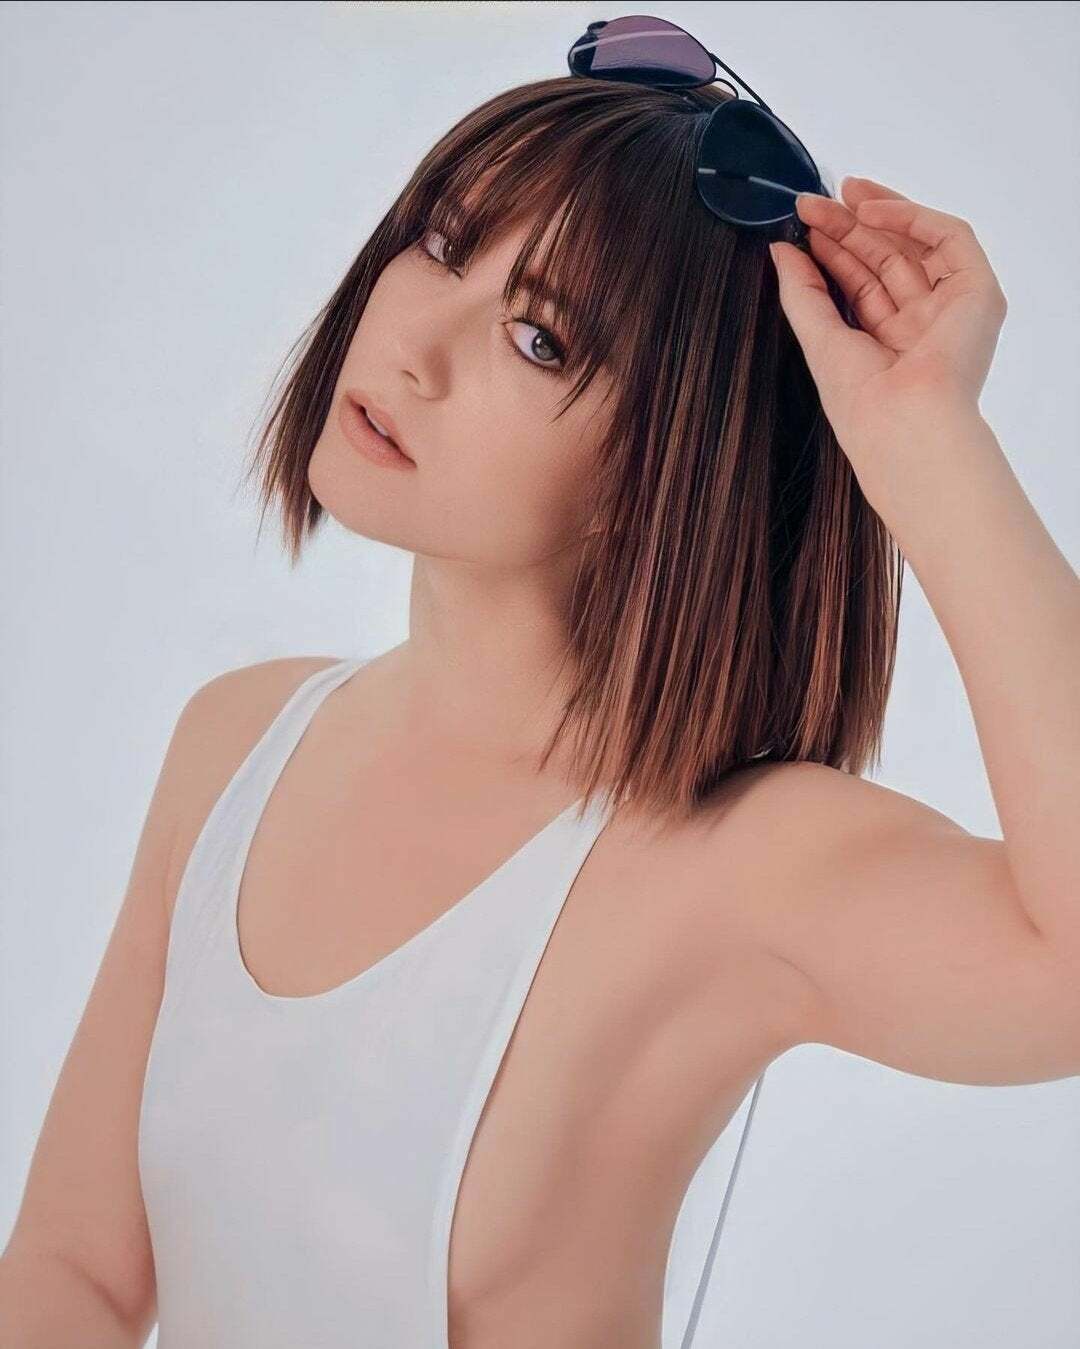 Mary Elizabeth Winstead's face was made for cum